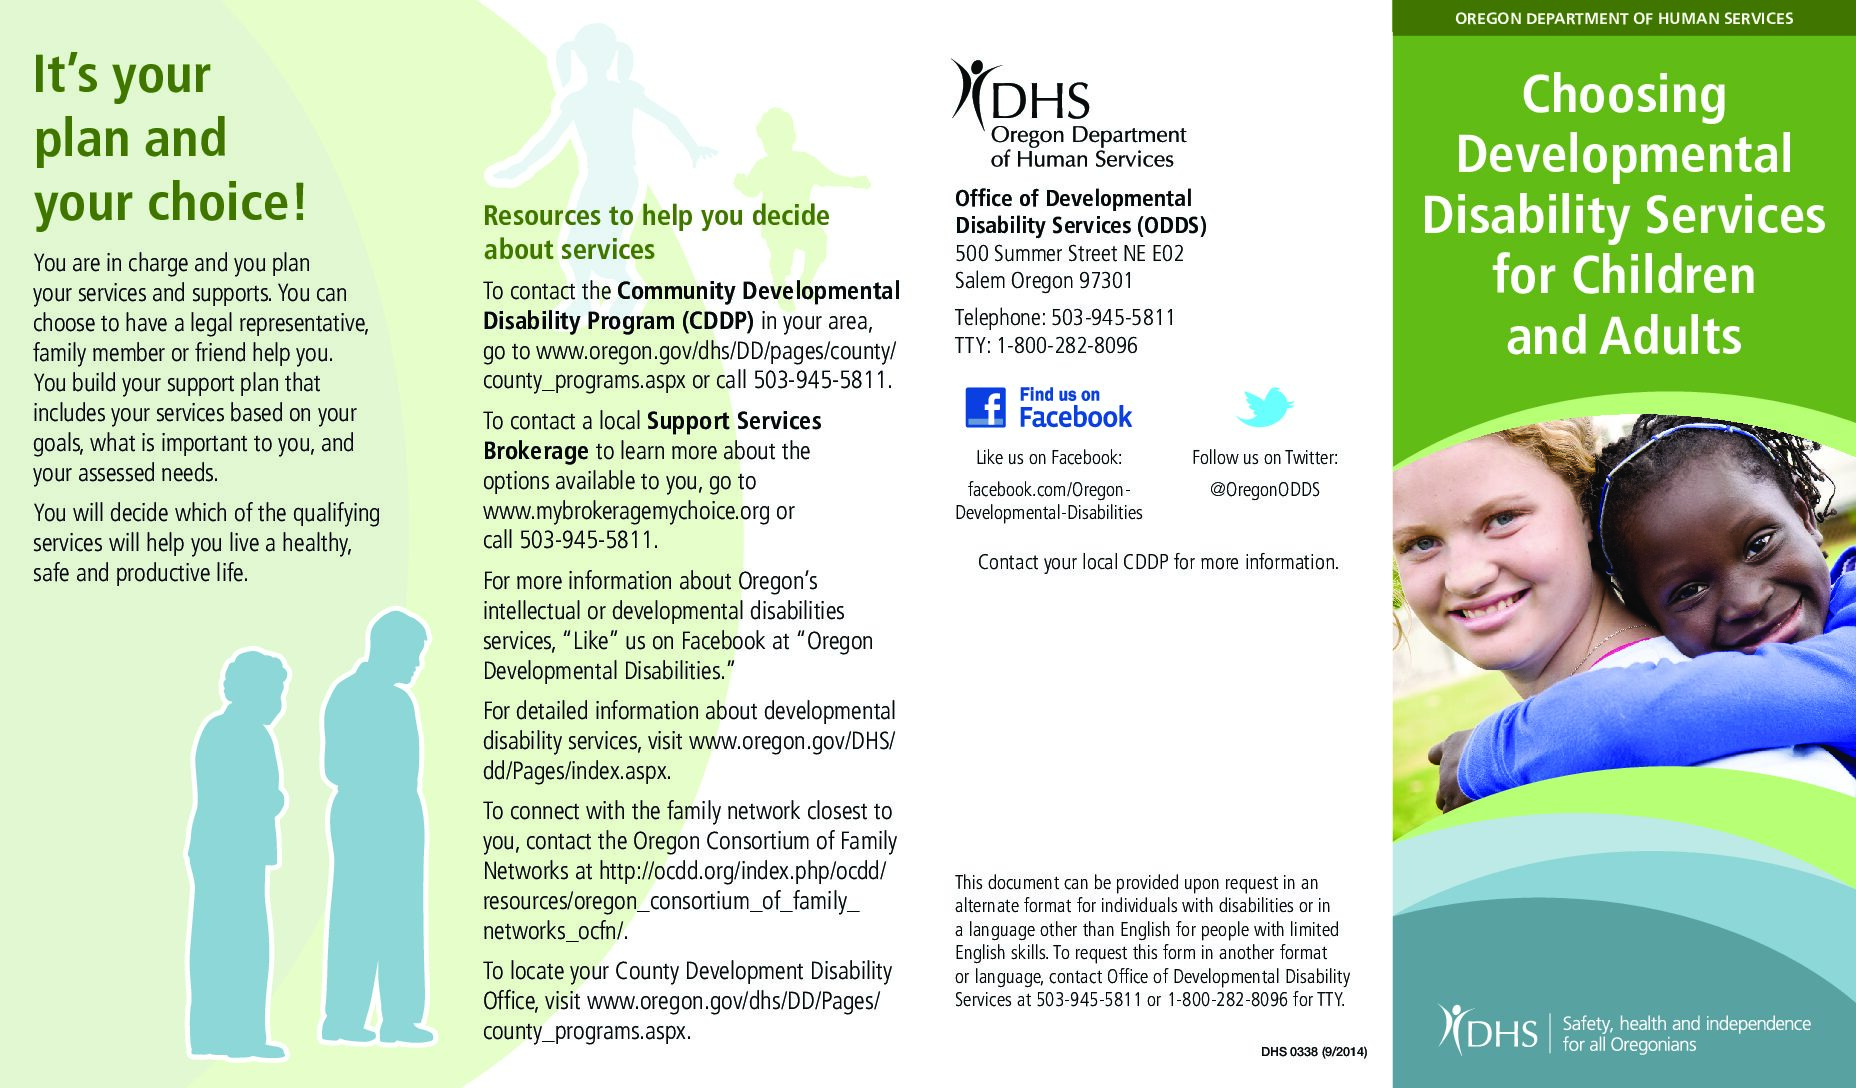 Choosing Developmental Disability Services for Children and Adults